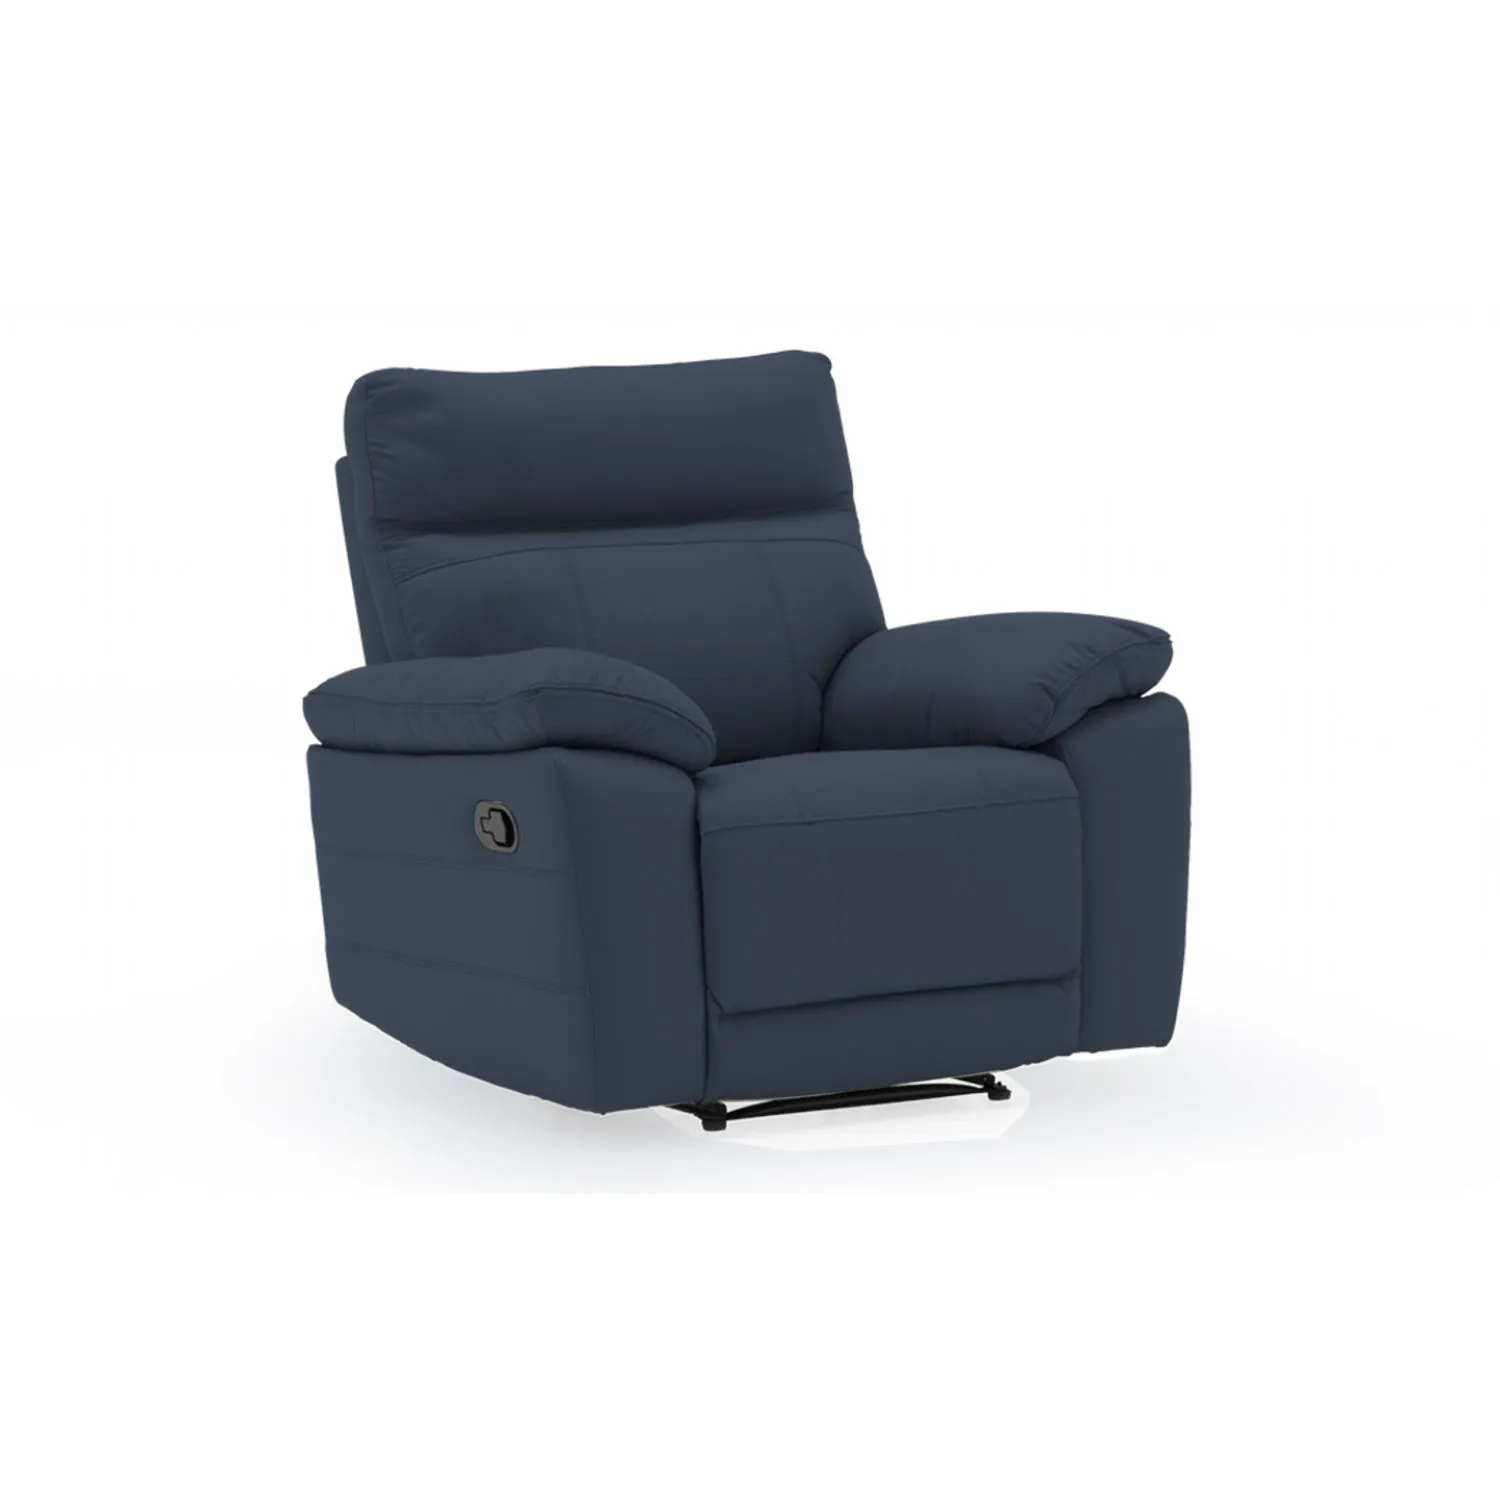 Blue Leather Match 1 Seater Recliner Wooden Frame